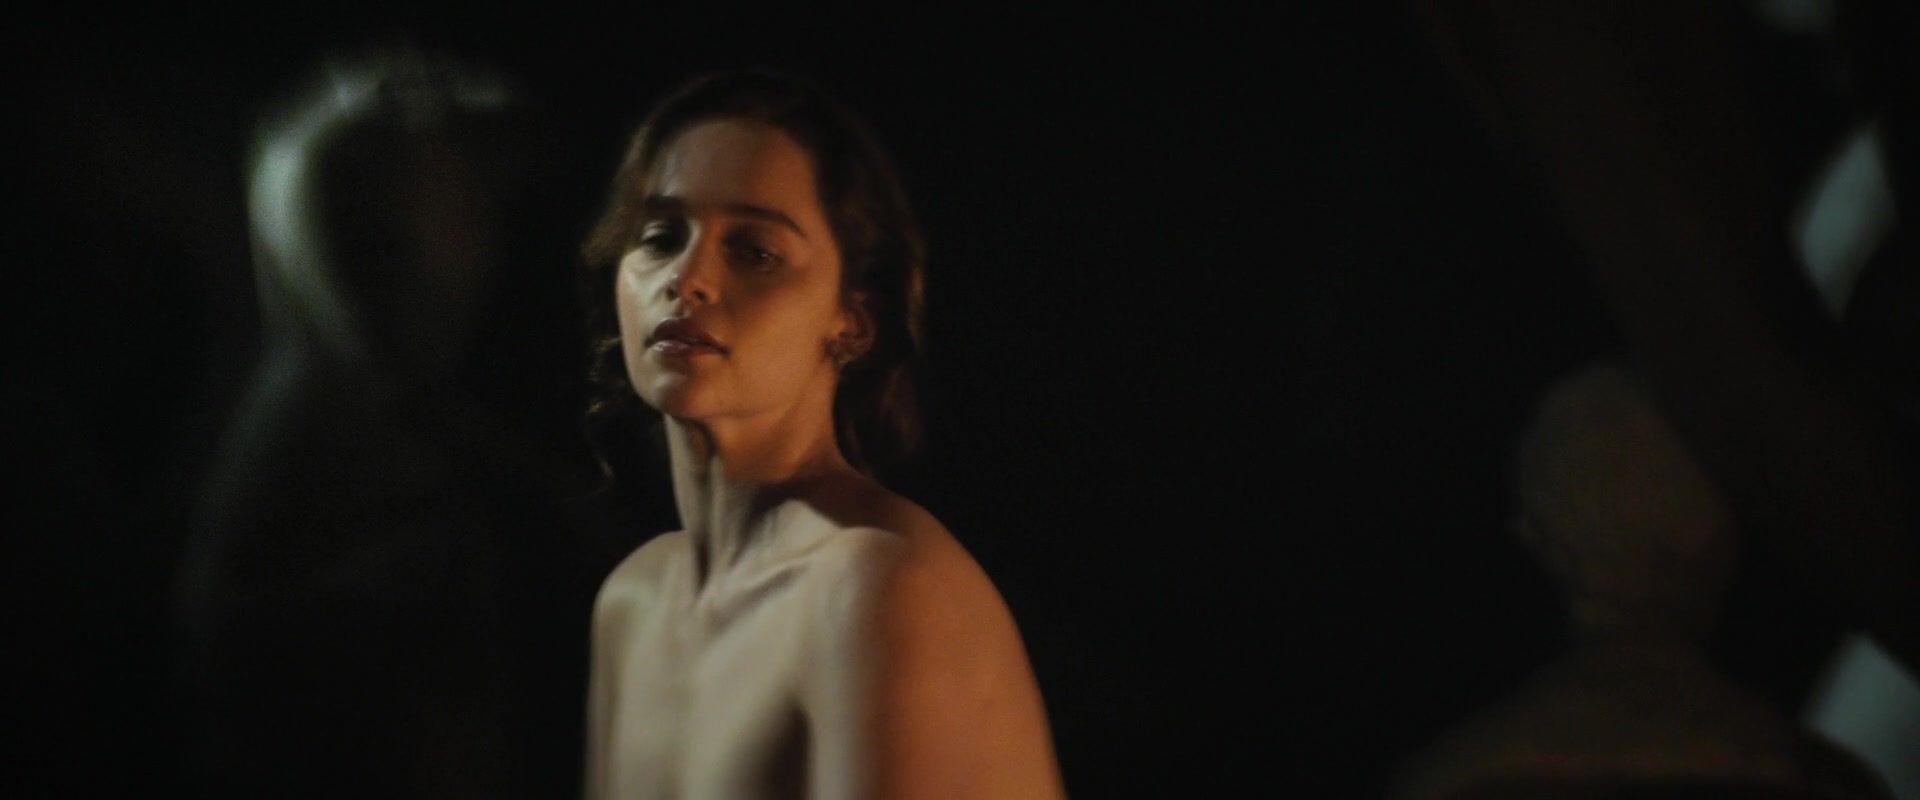 Chupando Naked Emilia Clarke in topless scene of the movie "Voice from the Stone" | Released in 2017 Nut - 2